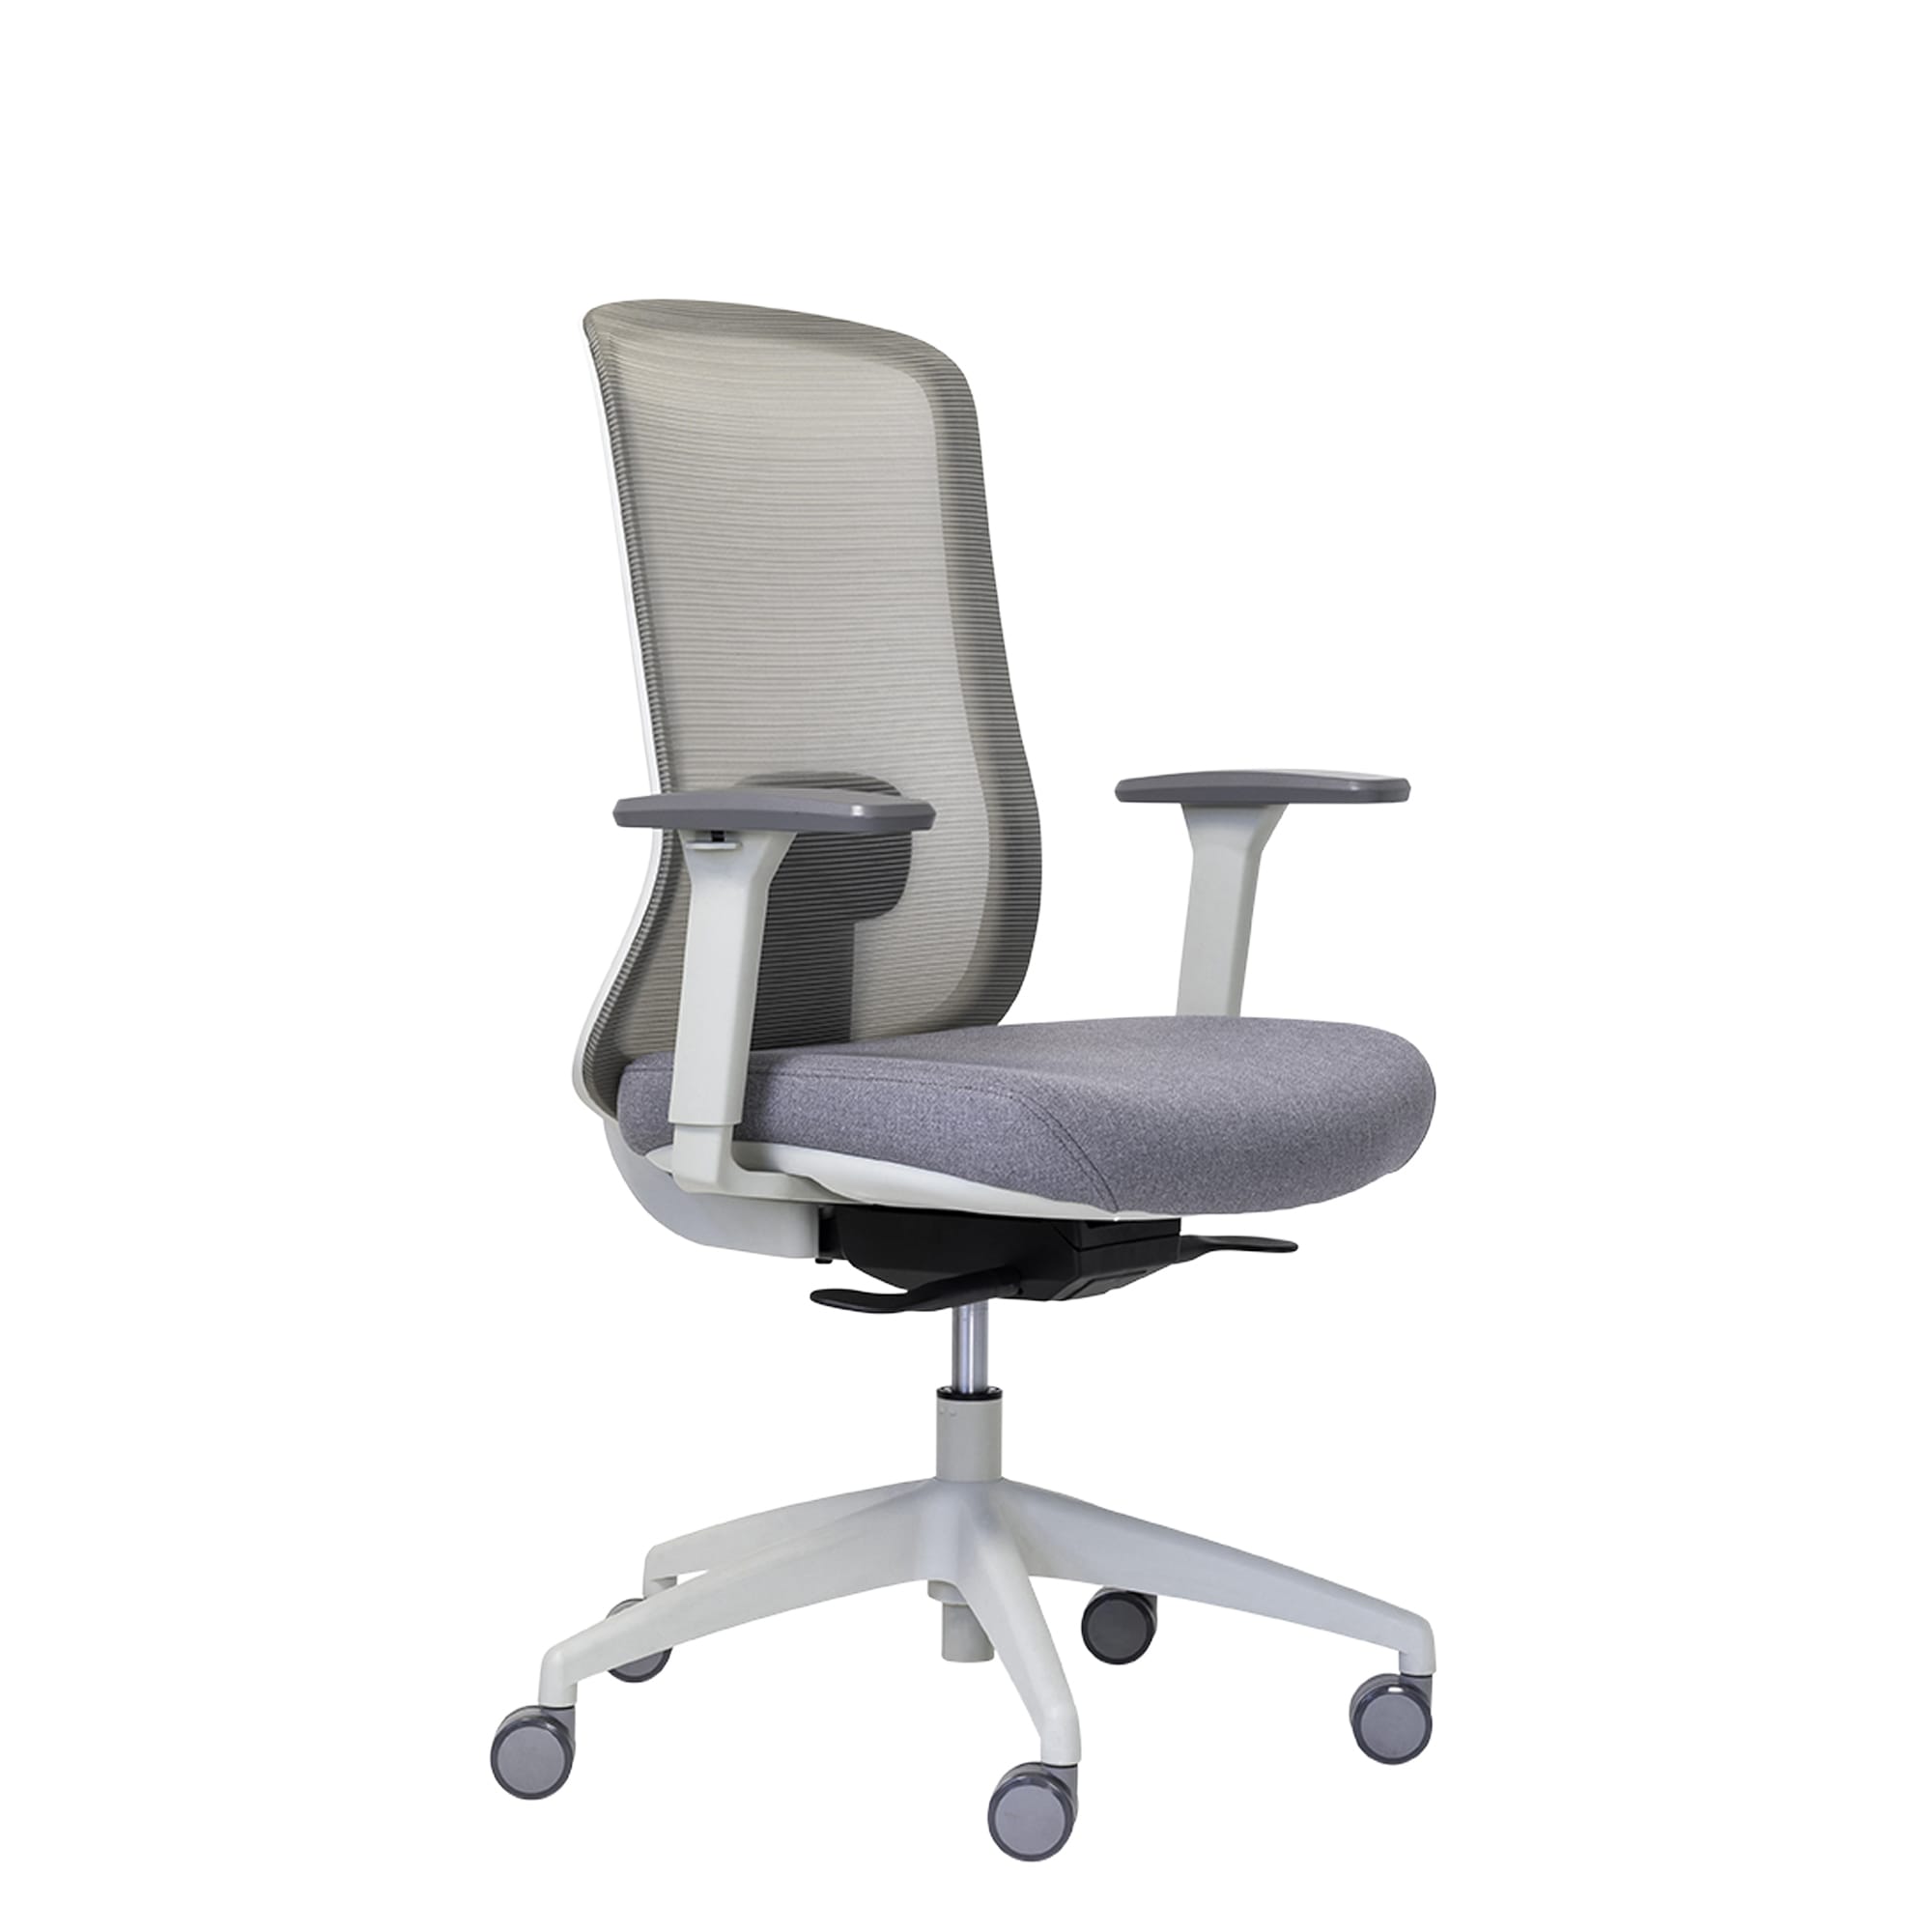 Buro Elan light grey ergonomic chair NZ with arms front angle